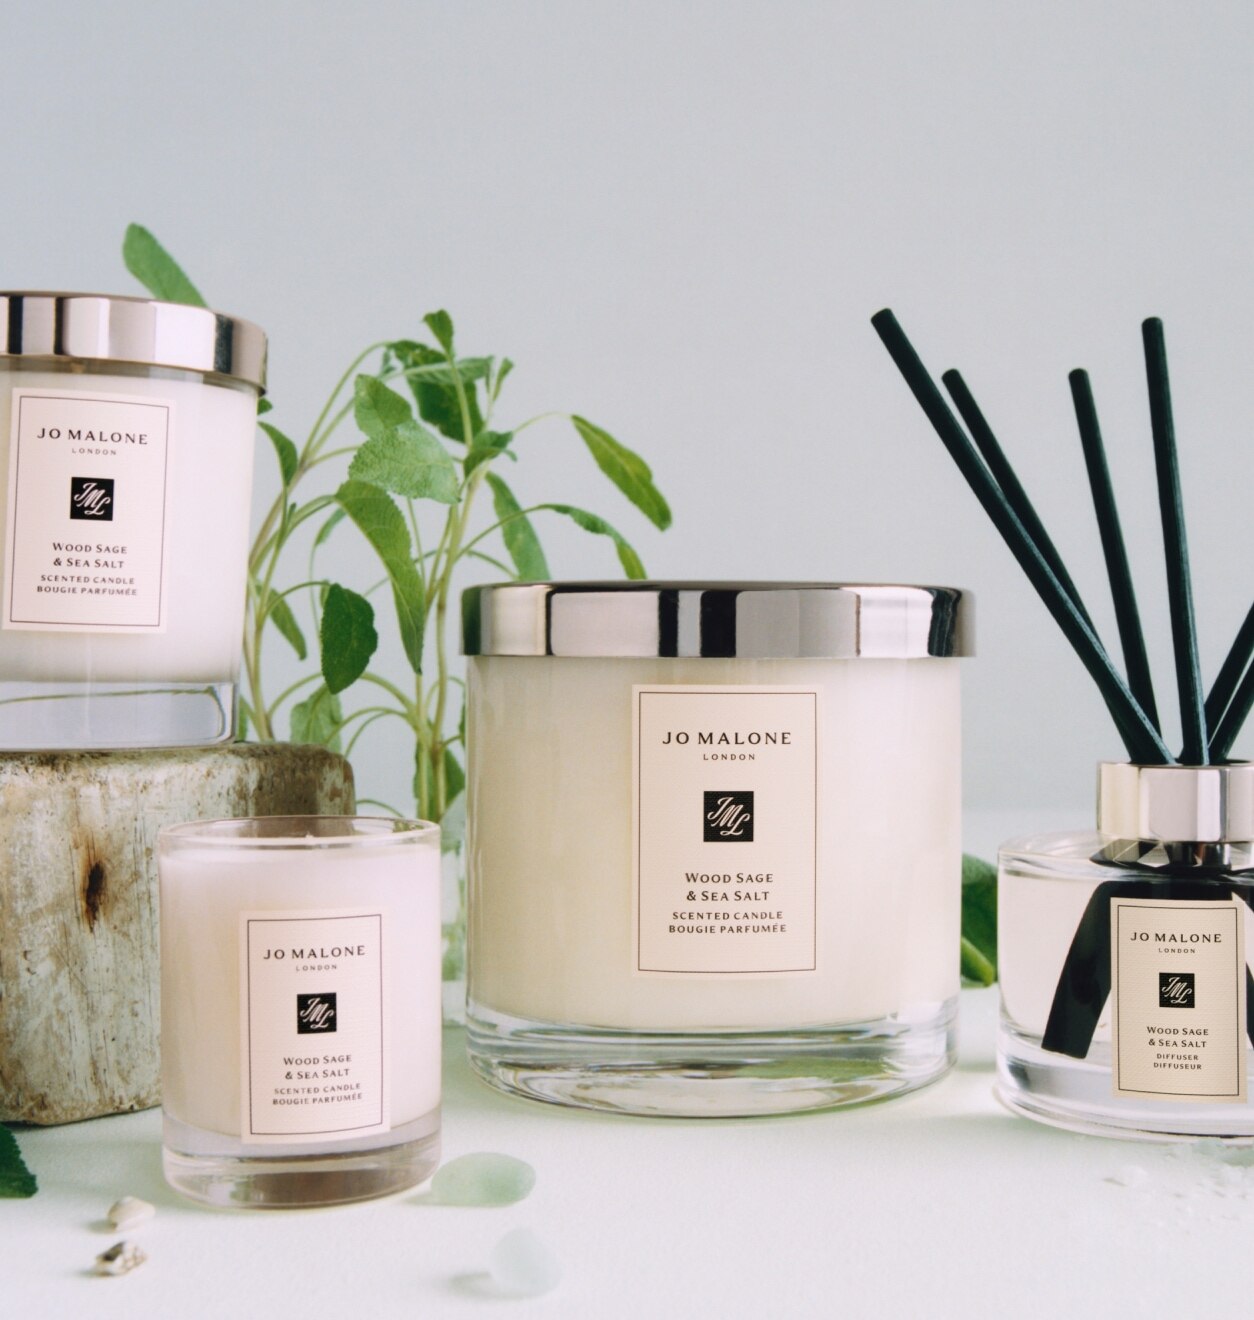 Jo Malone London Wood Sage & Sea Salt Home Collection Candles and Diffusers